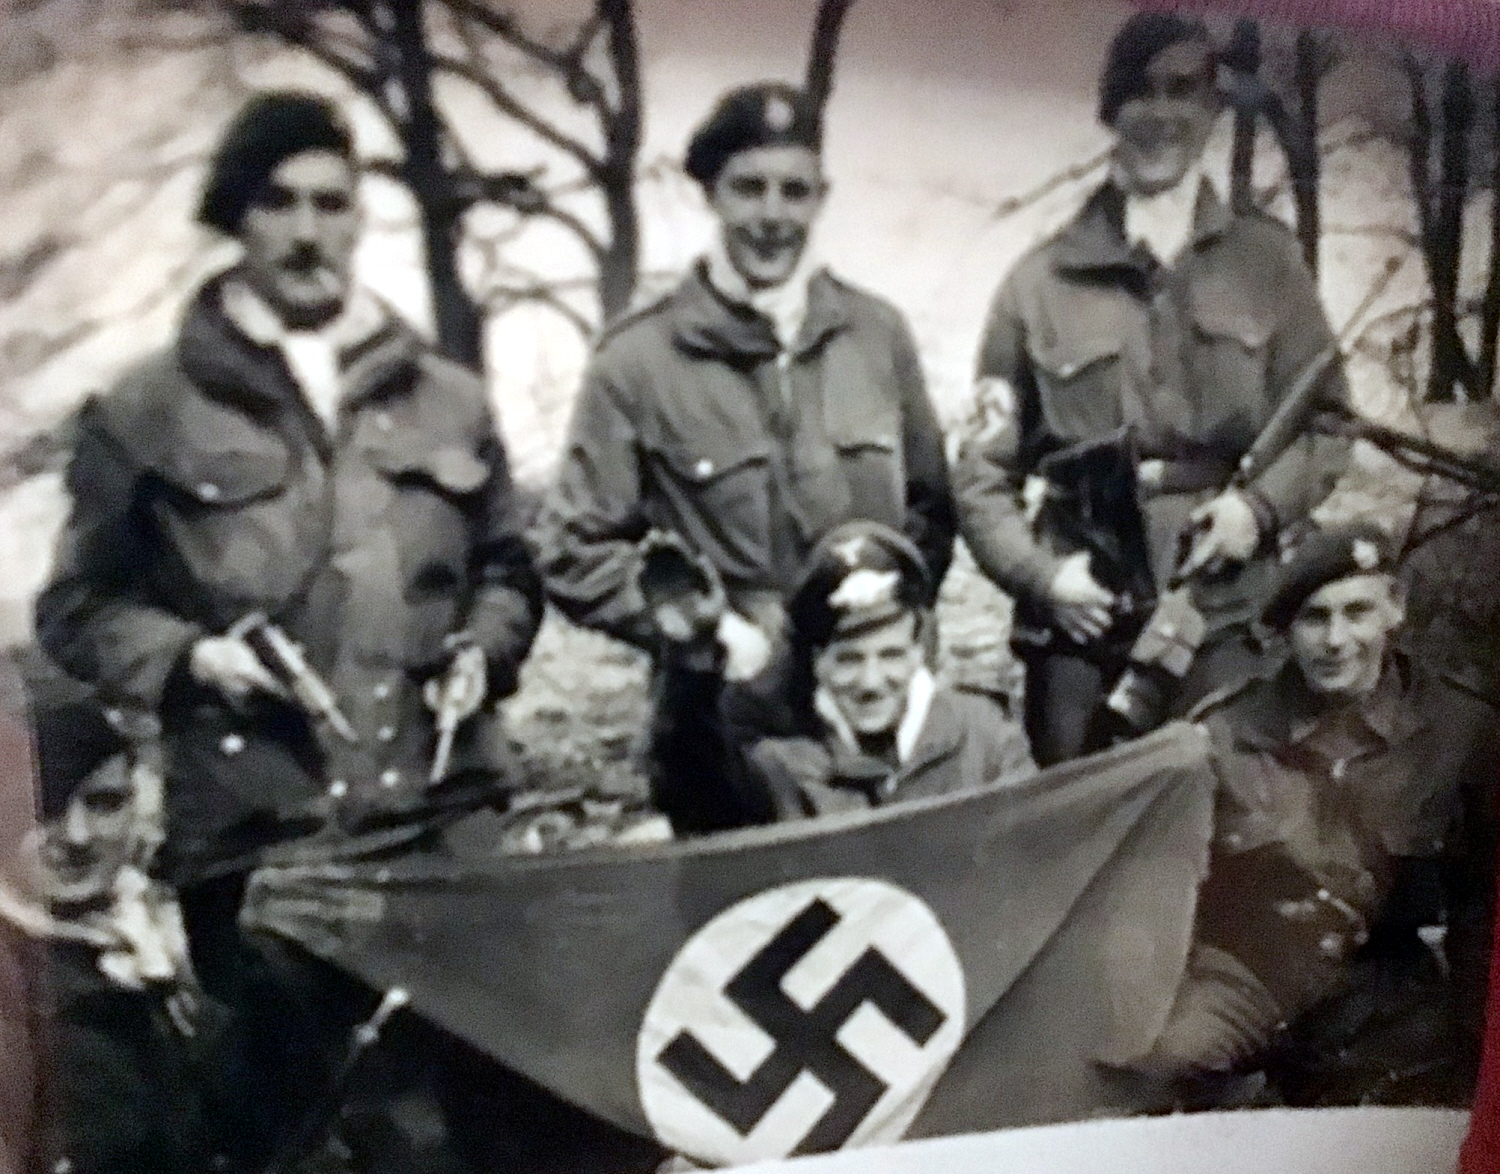 Royal Marine, John Perry and others mocking the enemy with captured flag and uniforms!